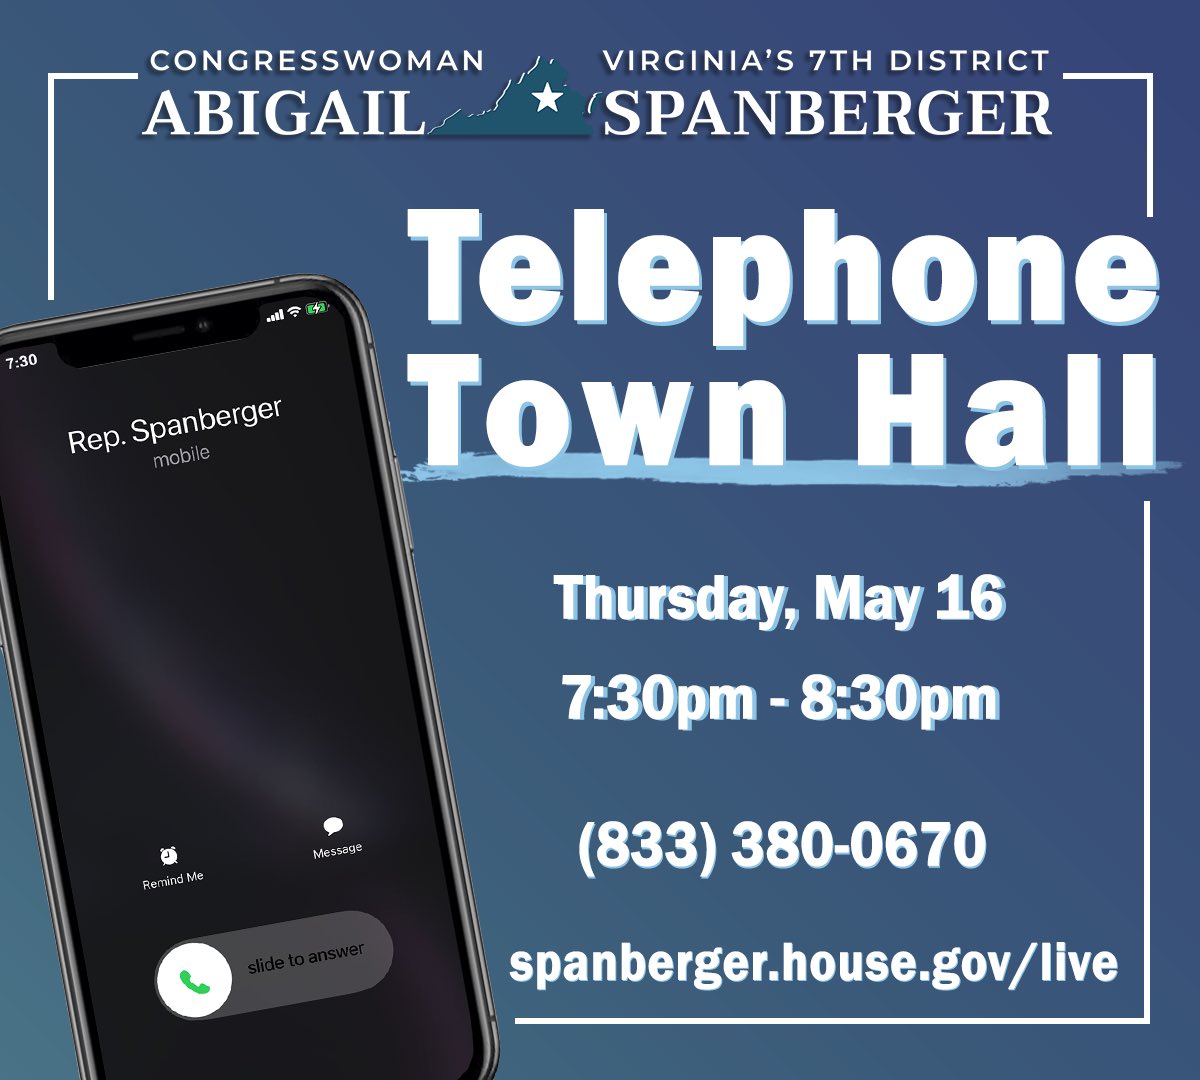 THURSDAY is our next telephone town hall! Join me to discuss the issues that matter most to you, your family, and our communities. ☎️ (833) 380-0670 🖥️ Watch live at spanberger.house.gov/live or facebook.com/RepSpanberger